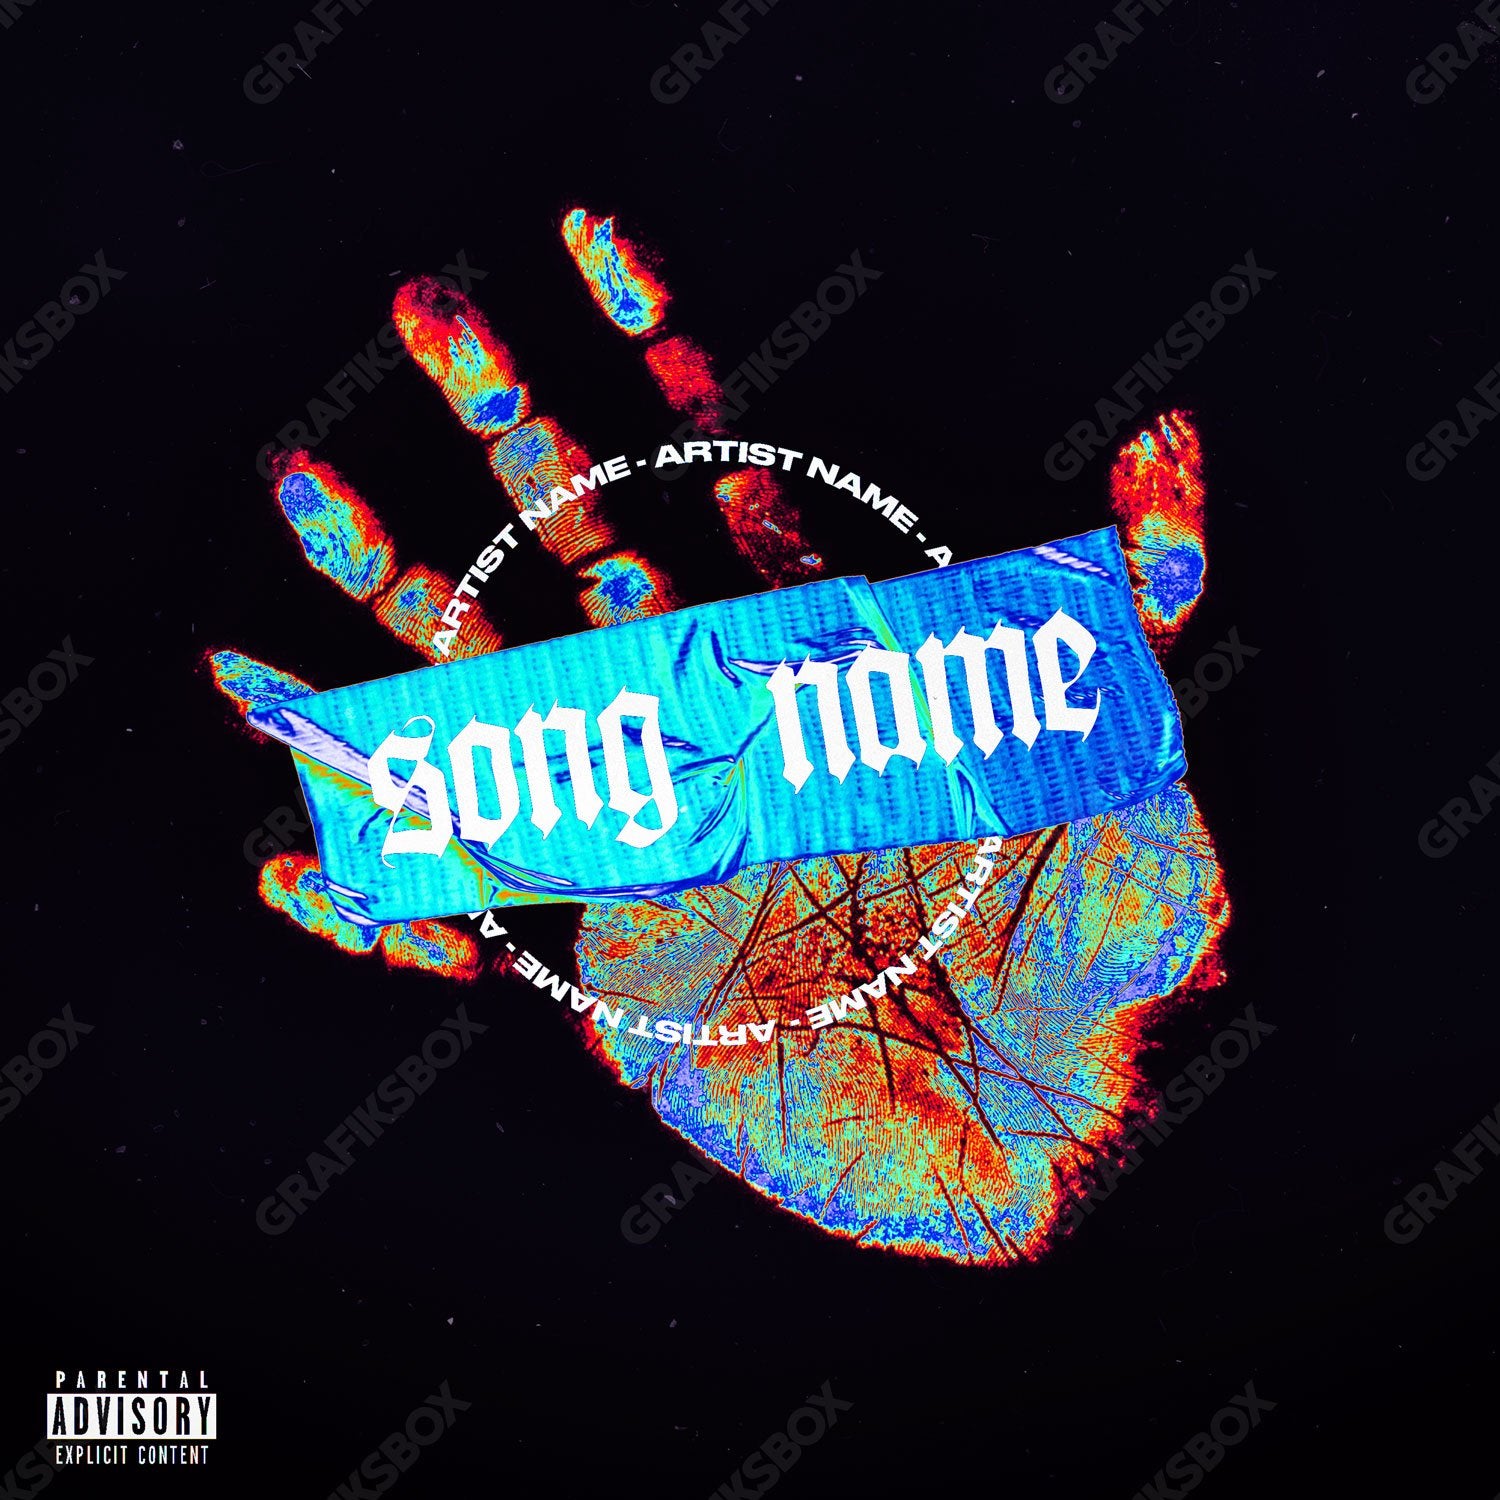 Touch premade cover art